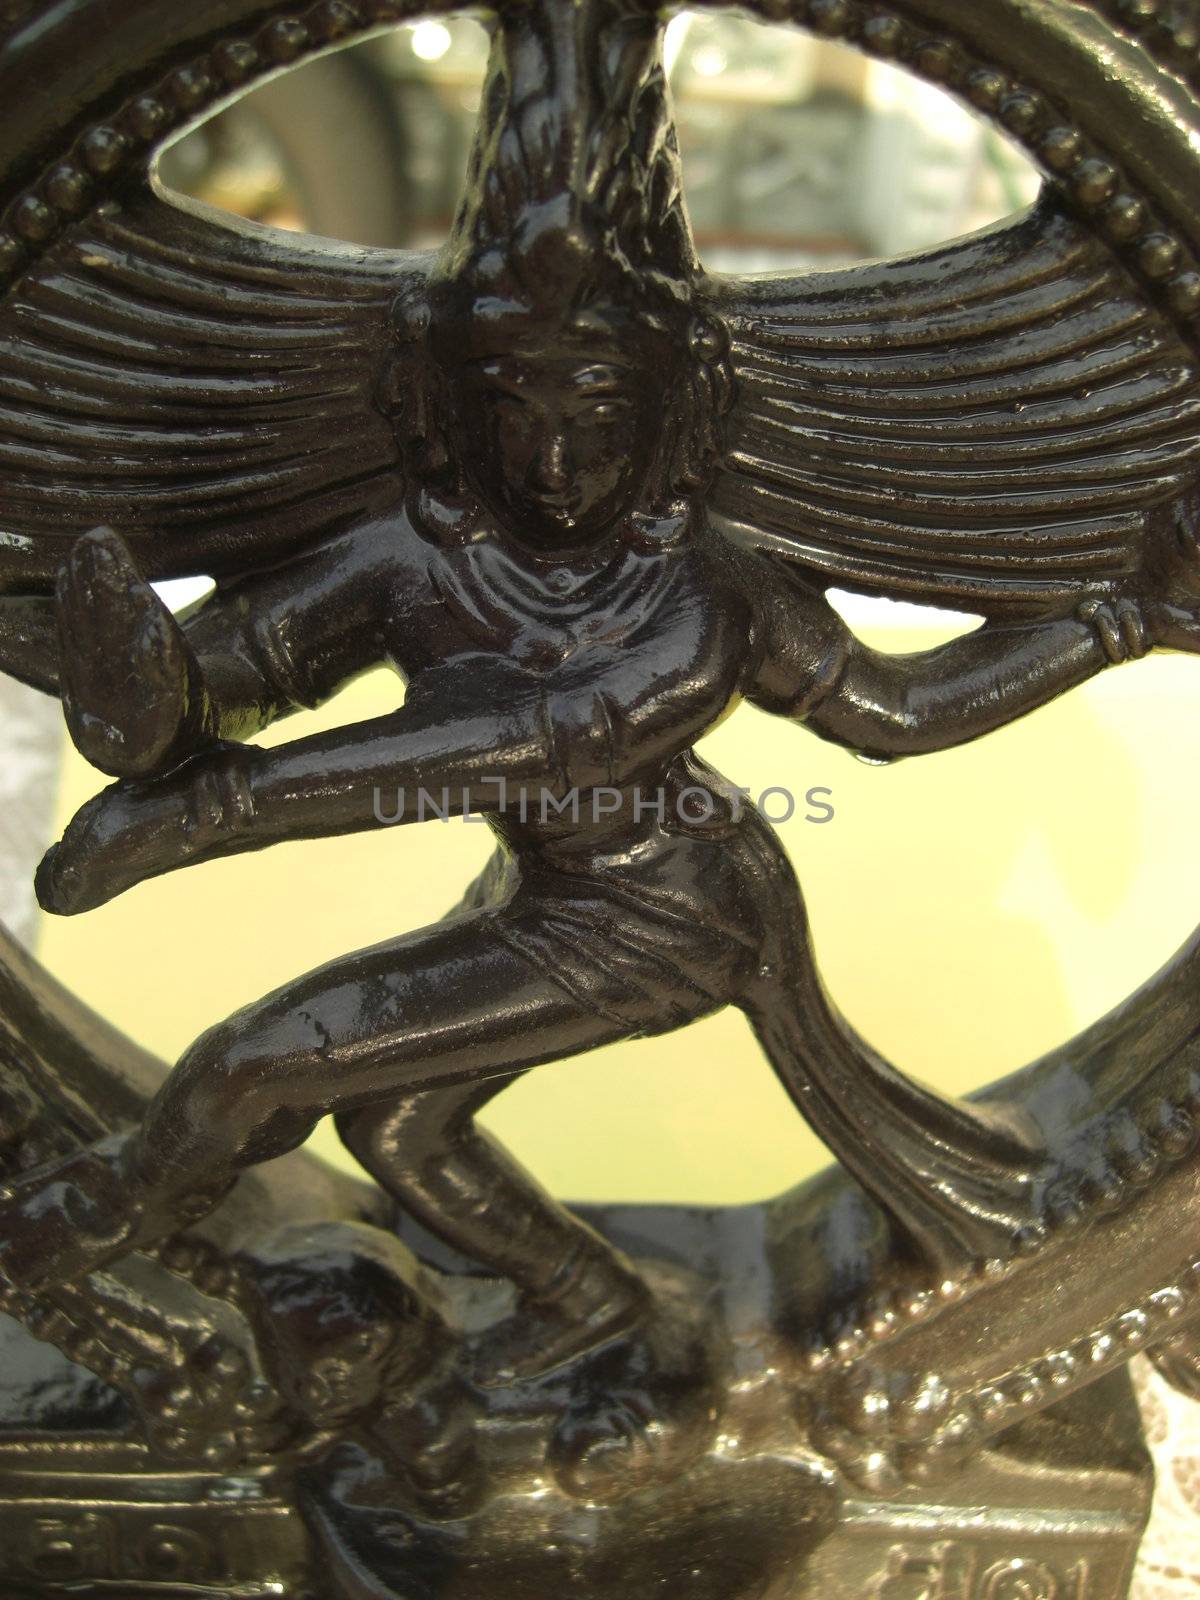 Shiva is also called the Lord of Dance. The rhythm of dance is a metaphor for the balance in the universe which Shiva is believed to hold